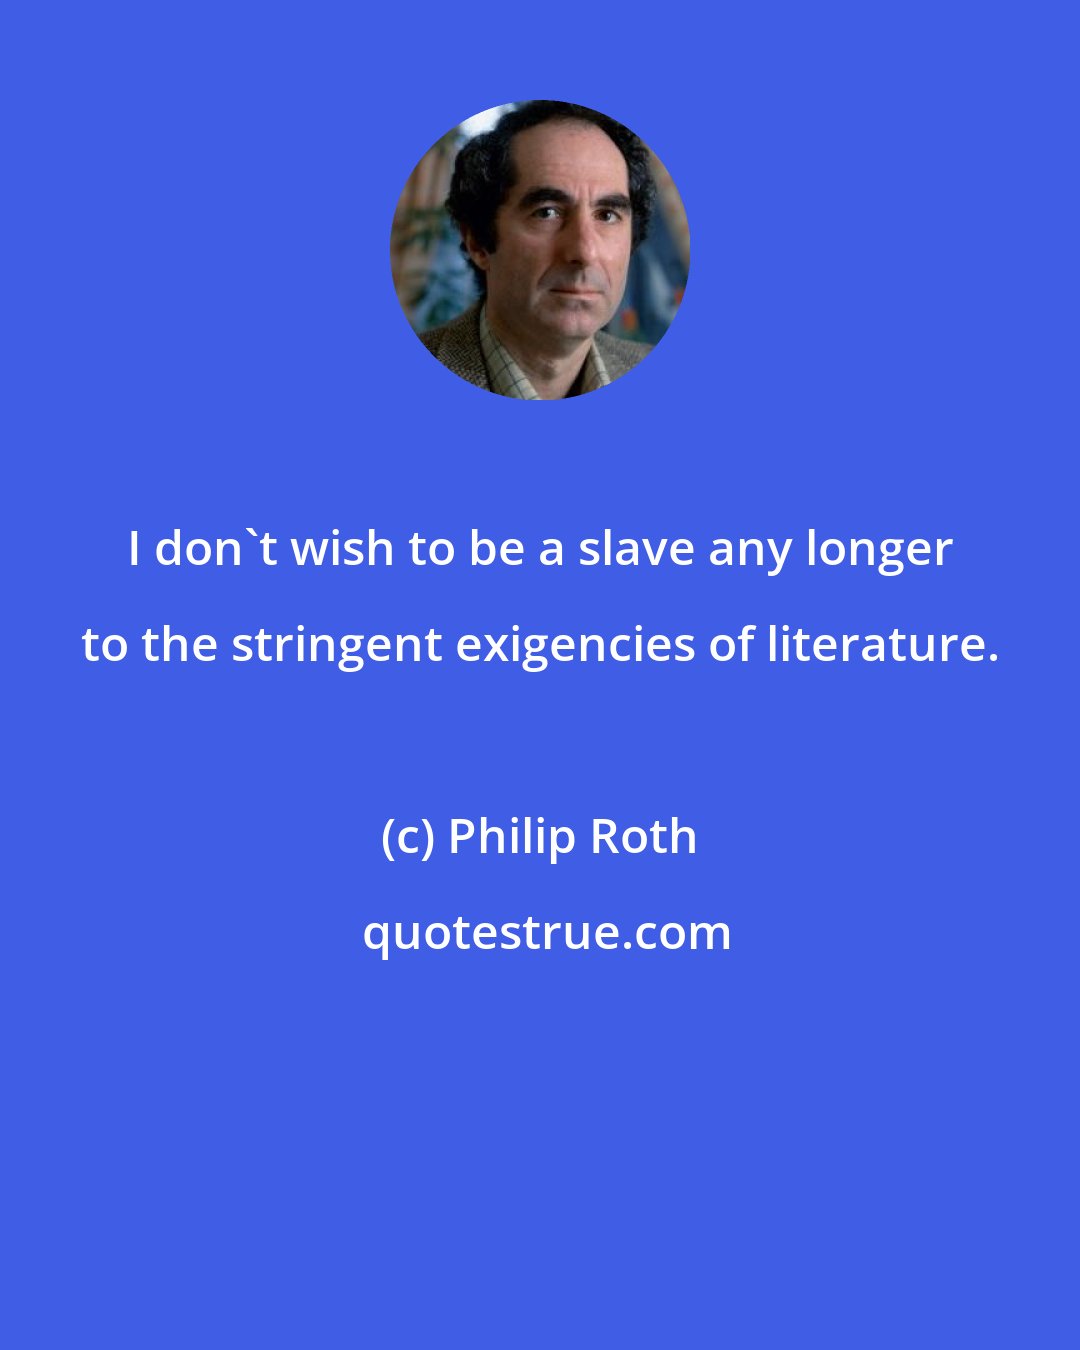 Philip Roth: I don't wish to be a slave any longer to the stringent exigencies of literature.